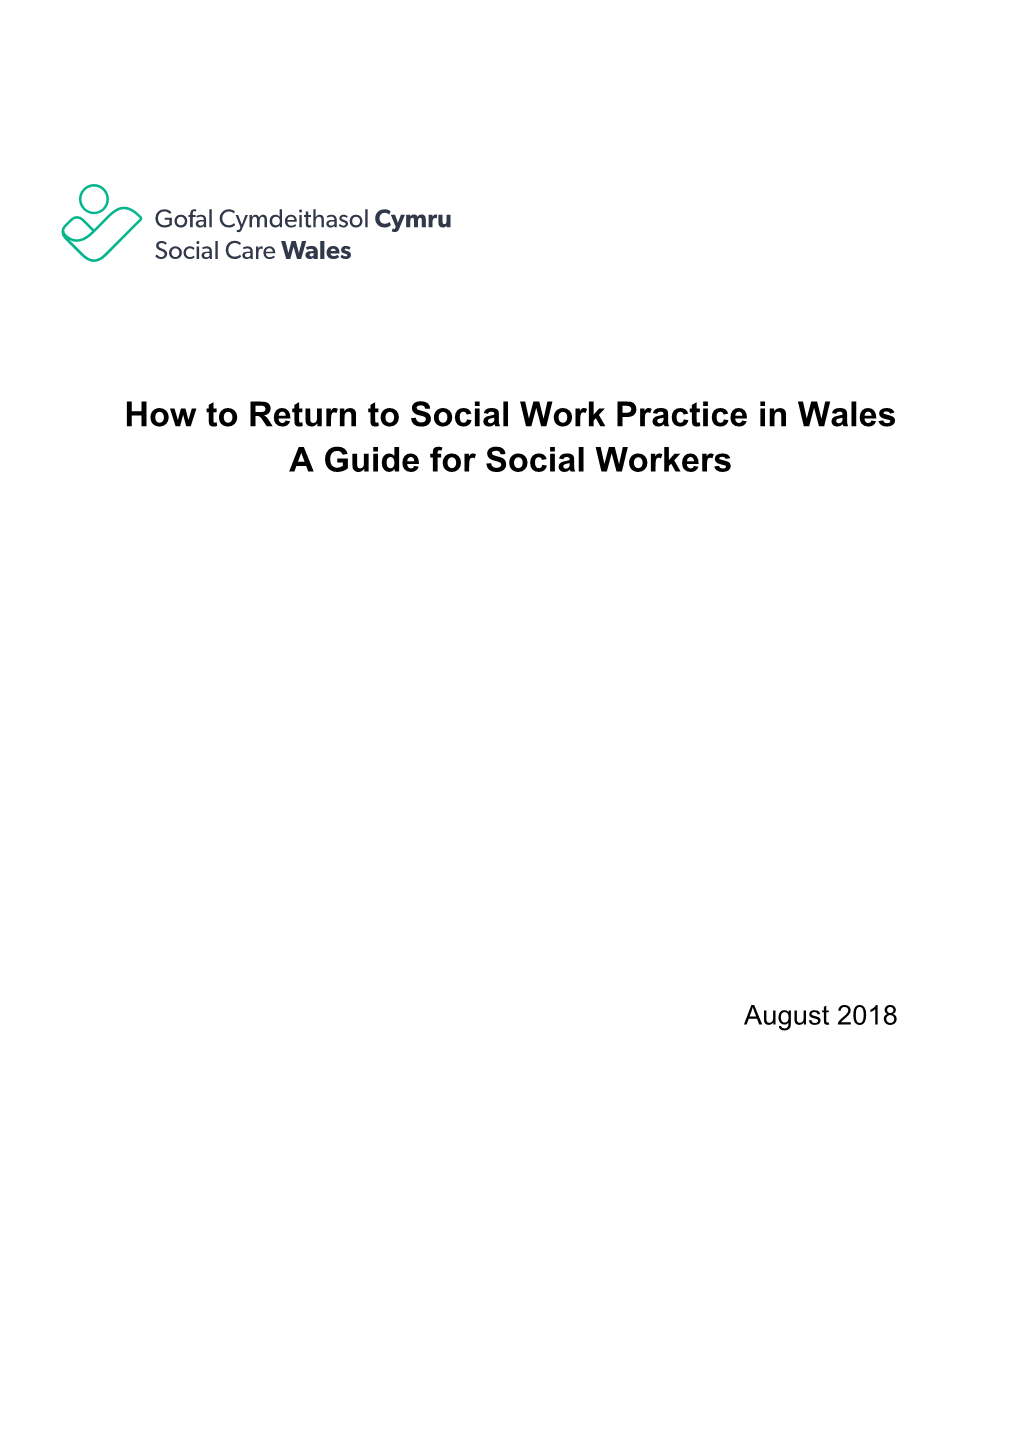 How to Return to Social Work Practice in Wales